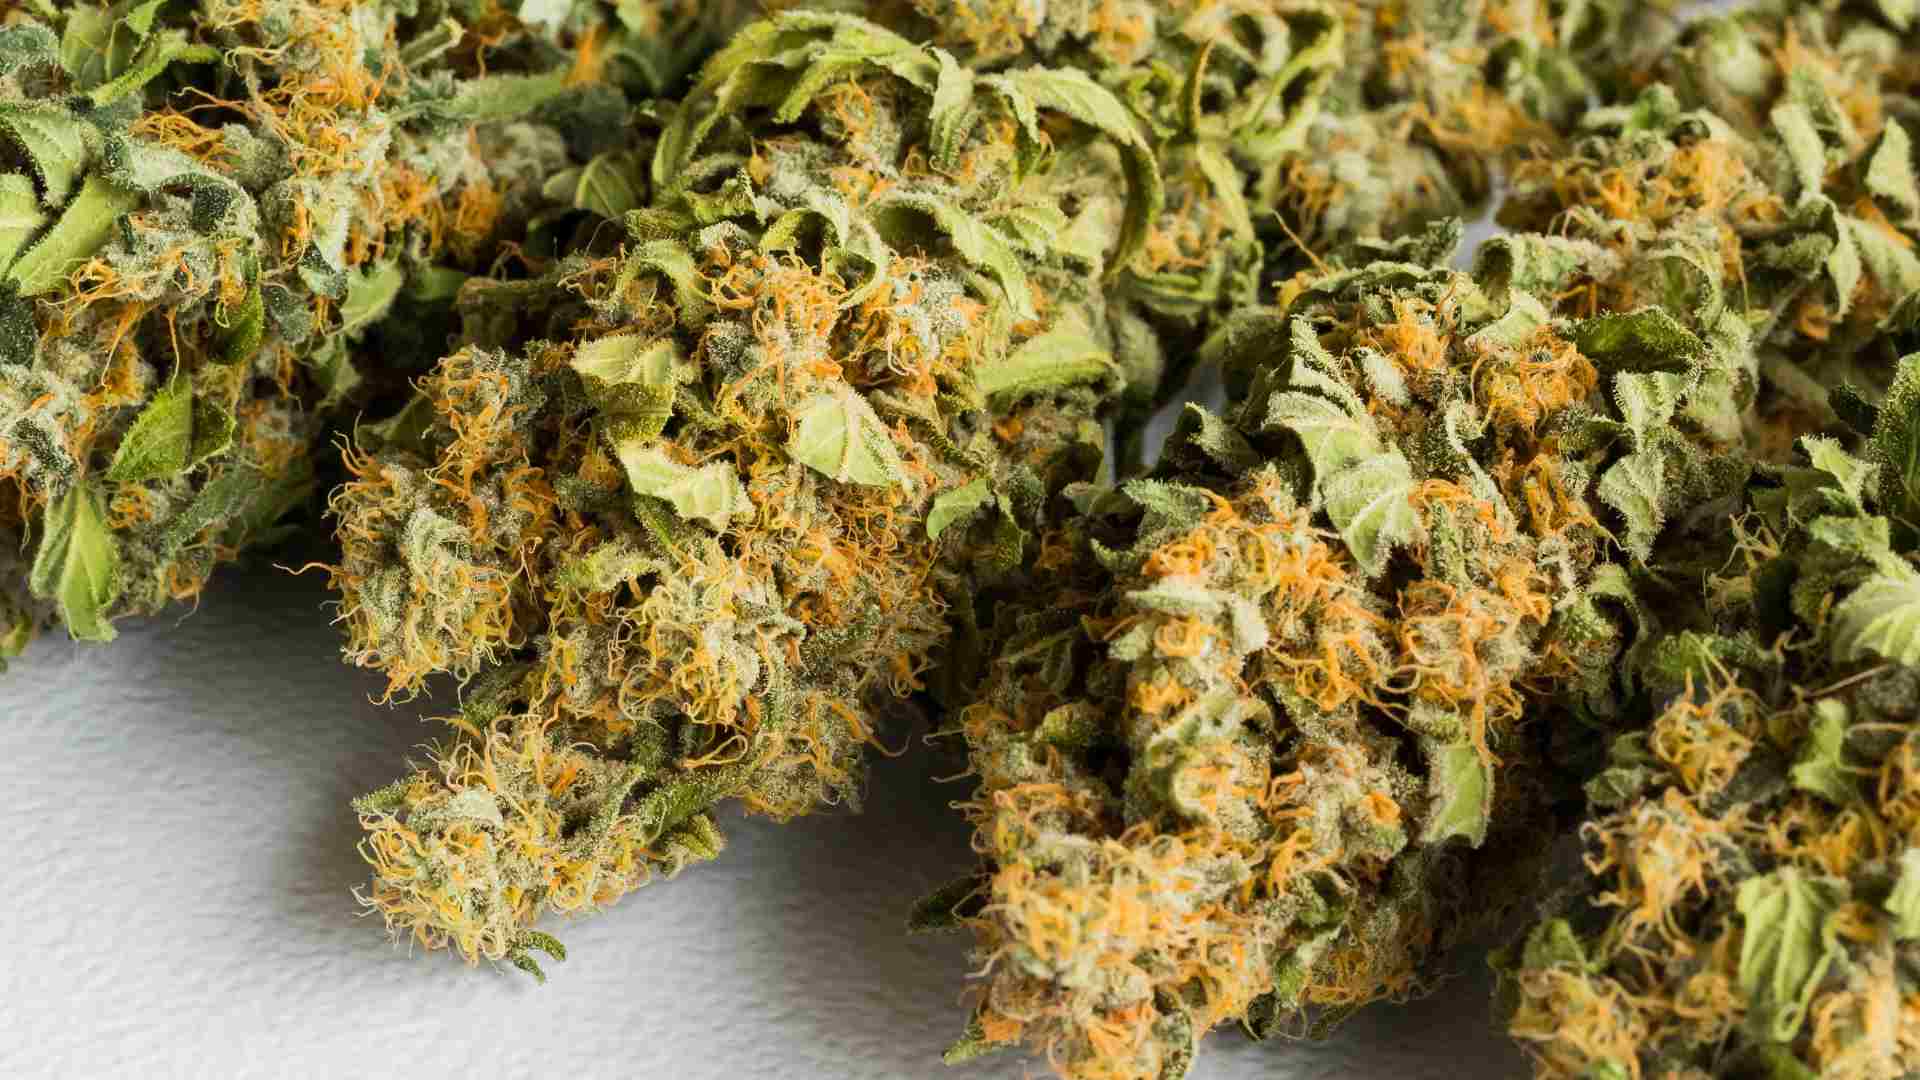 sativa strains a perfect choice for daytime use and socializing